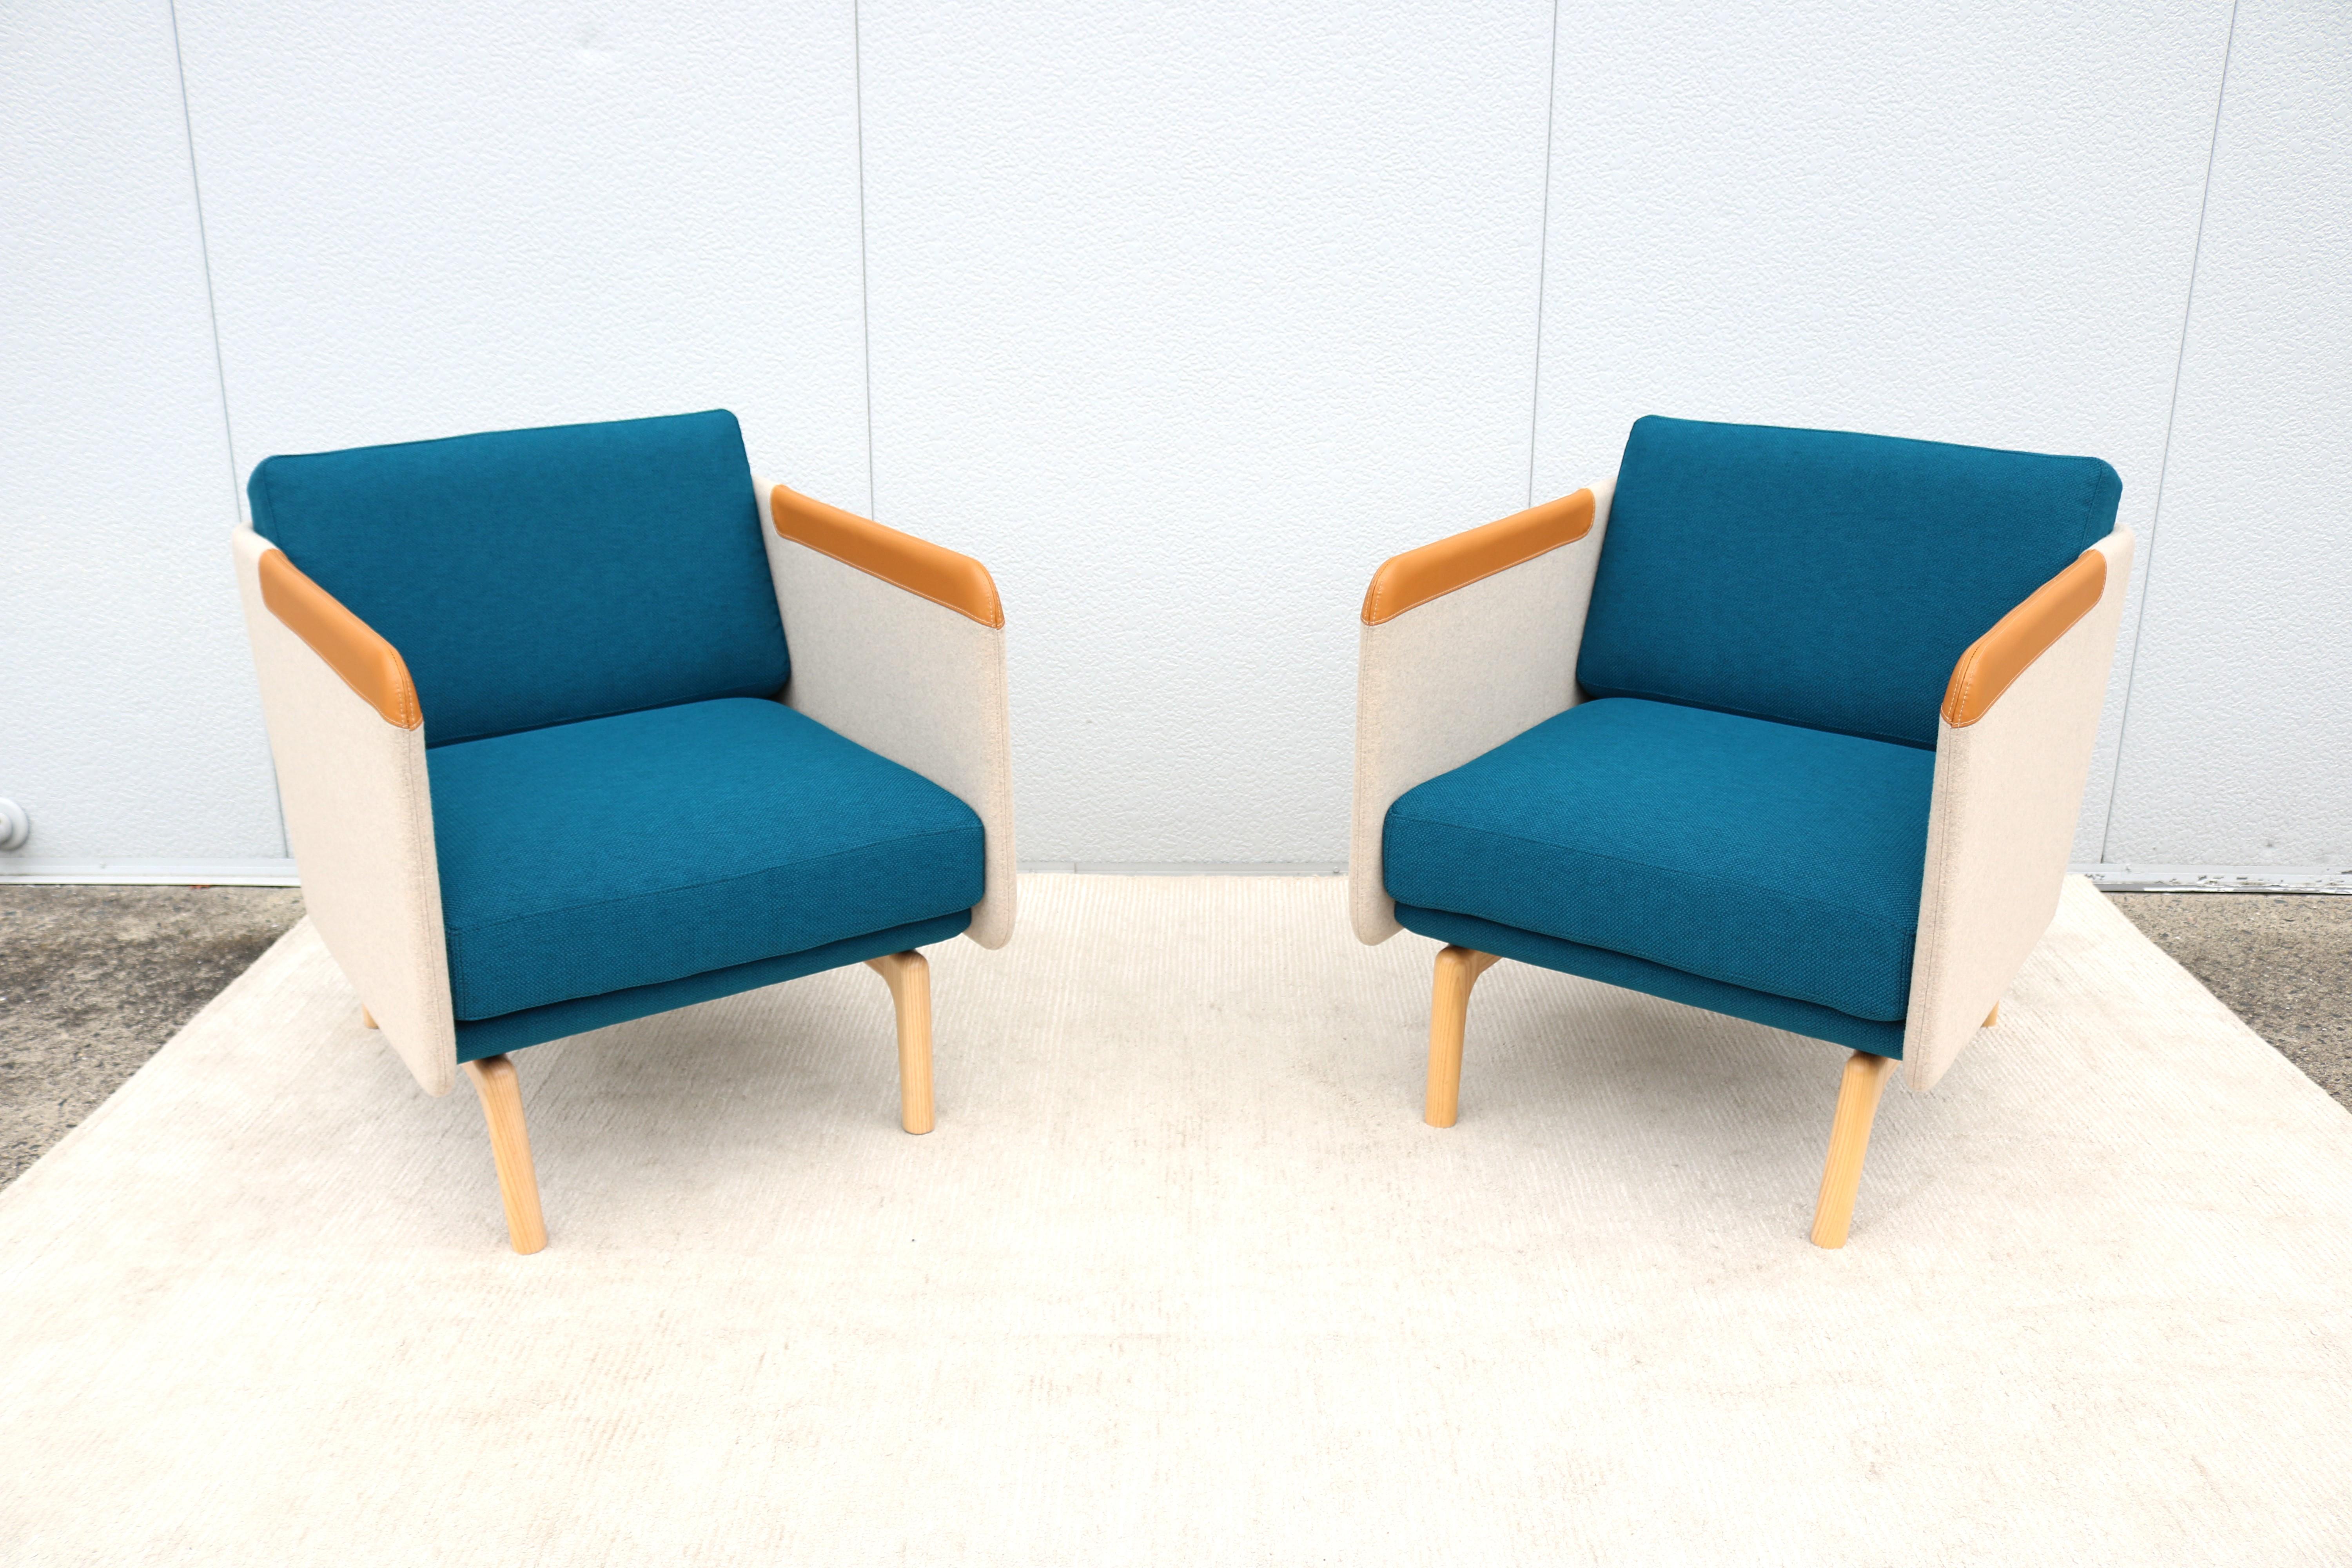 American Contemporary Modern Roger Webb for OFS Heya Wool Lounge Chairs - a Pair For Sale